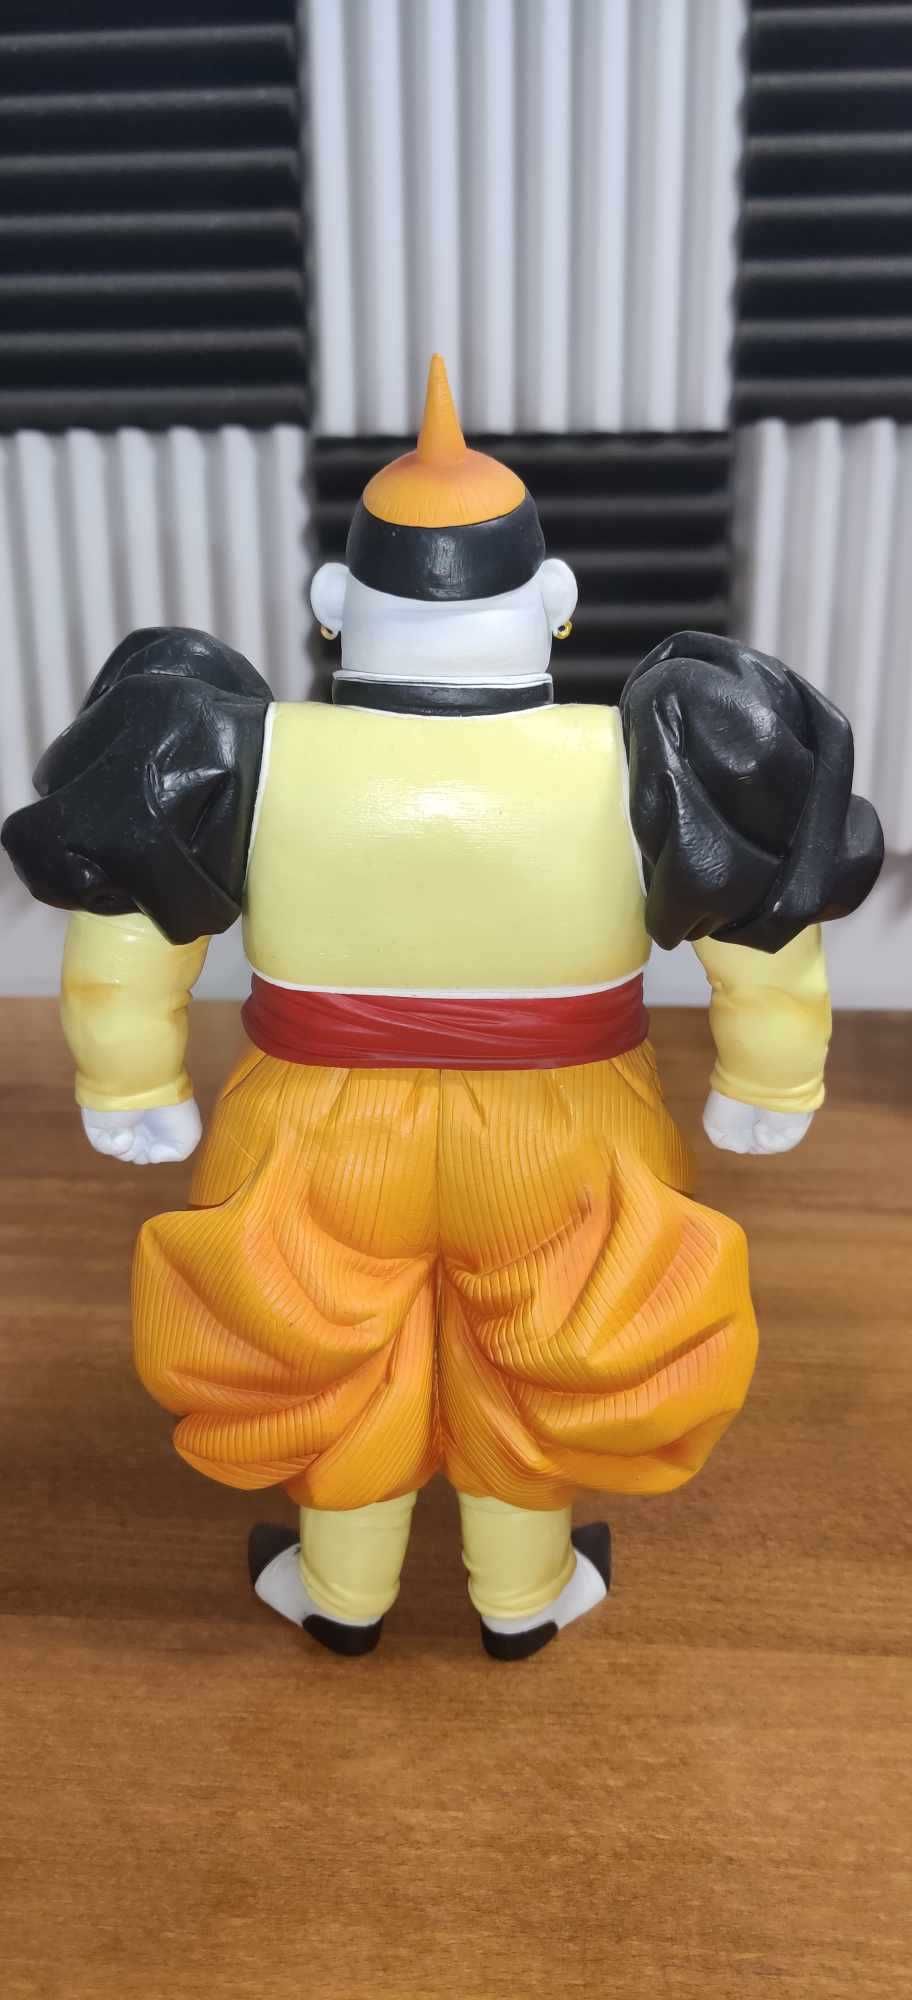 Dragon Ball Z - Android 19 - 25 cm